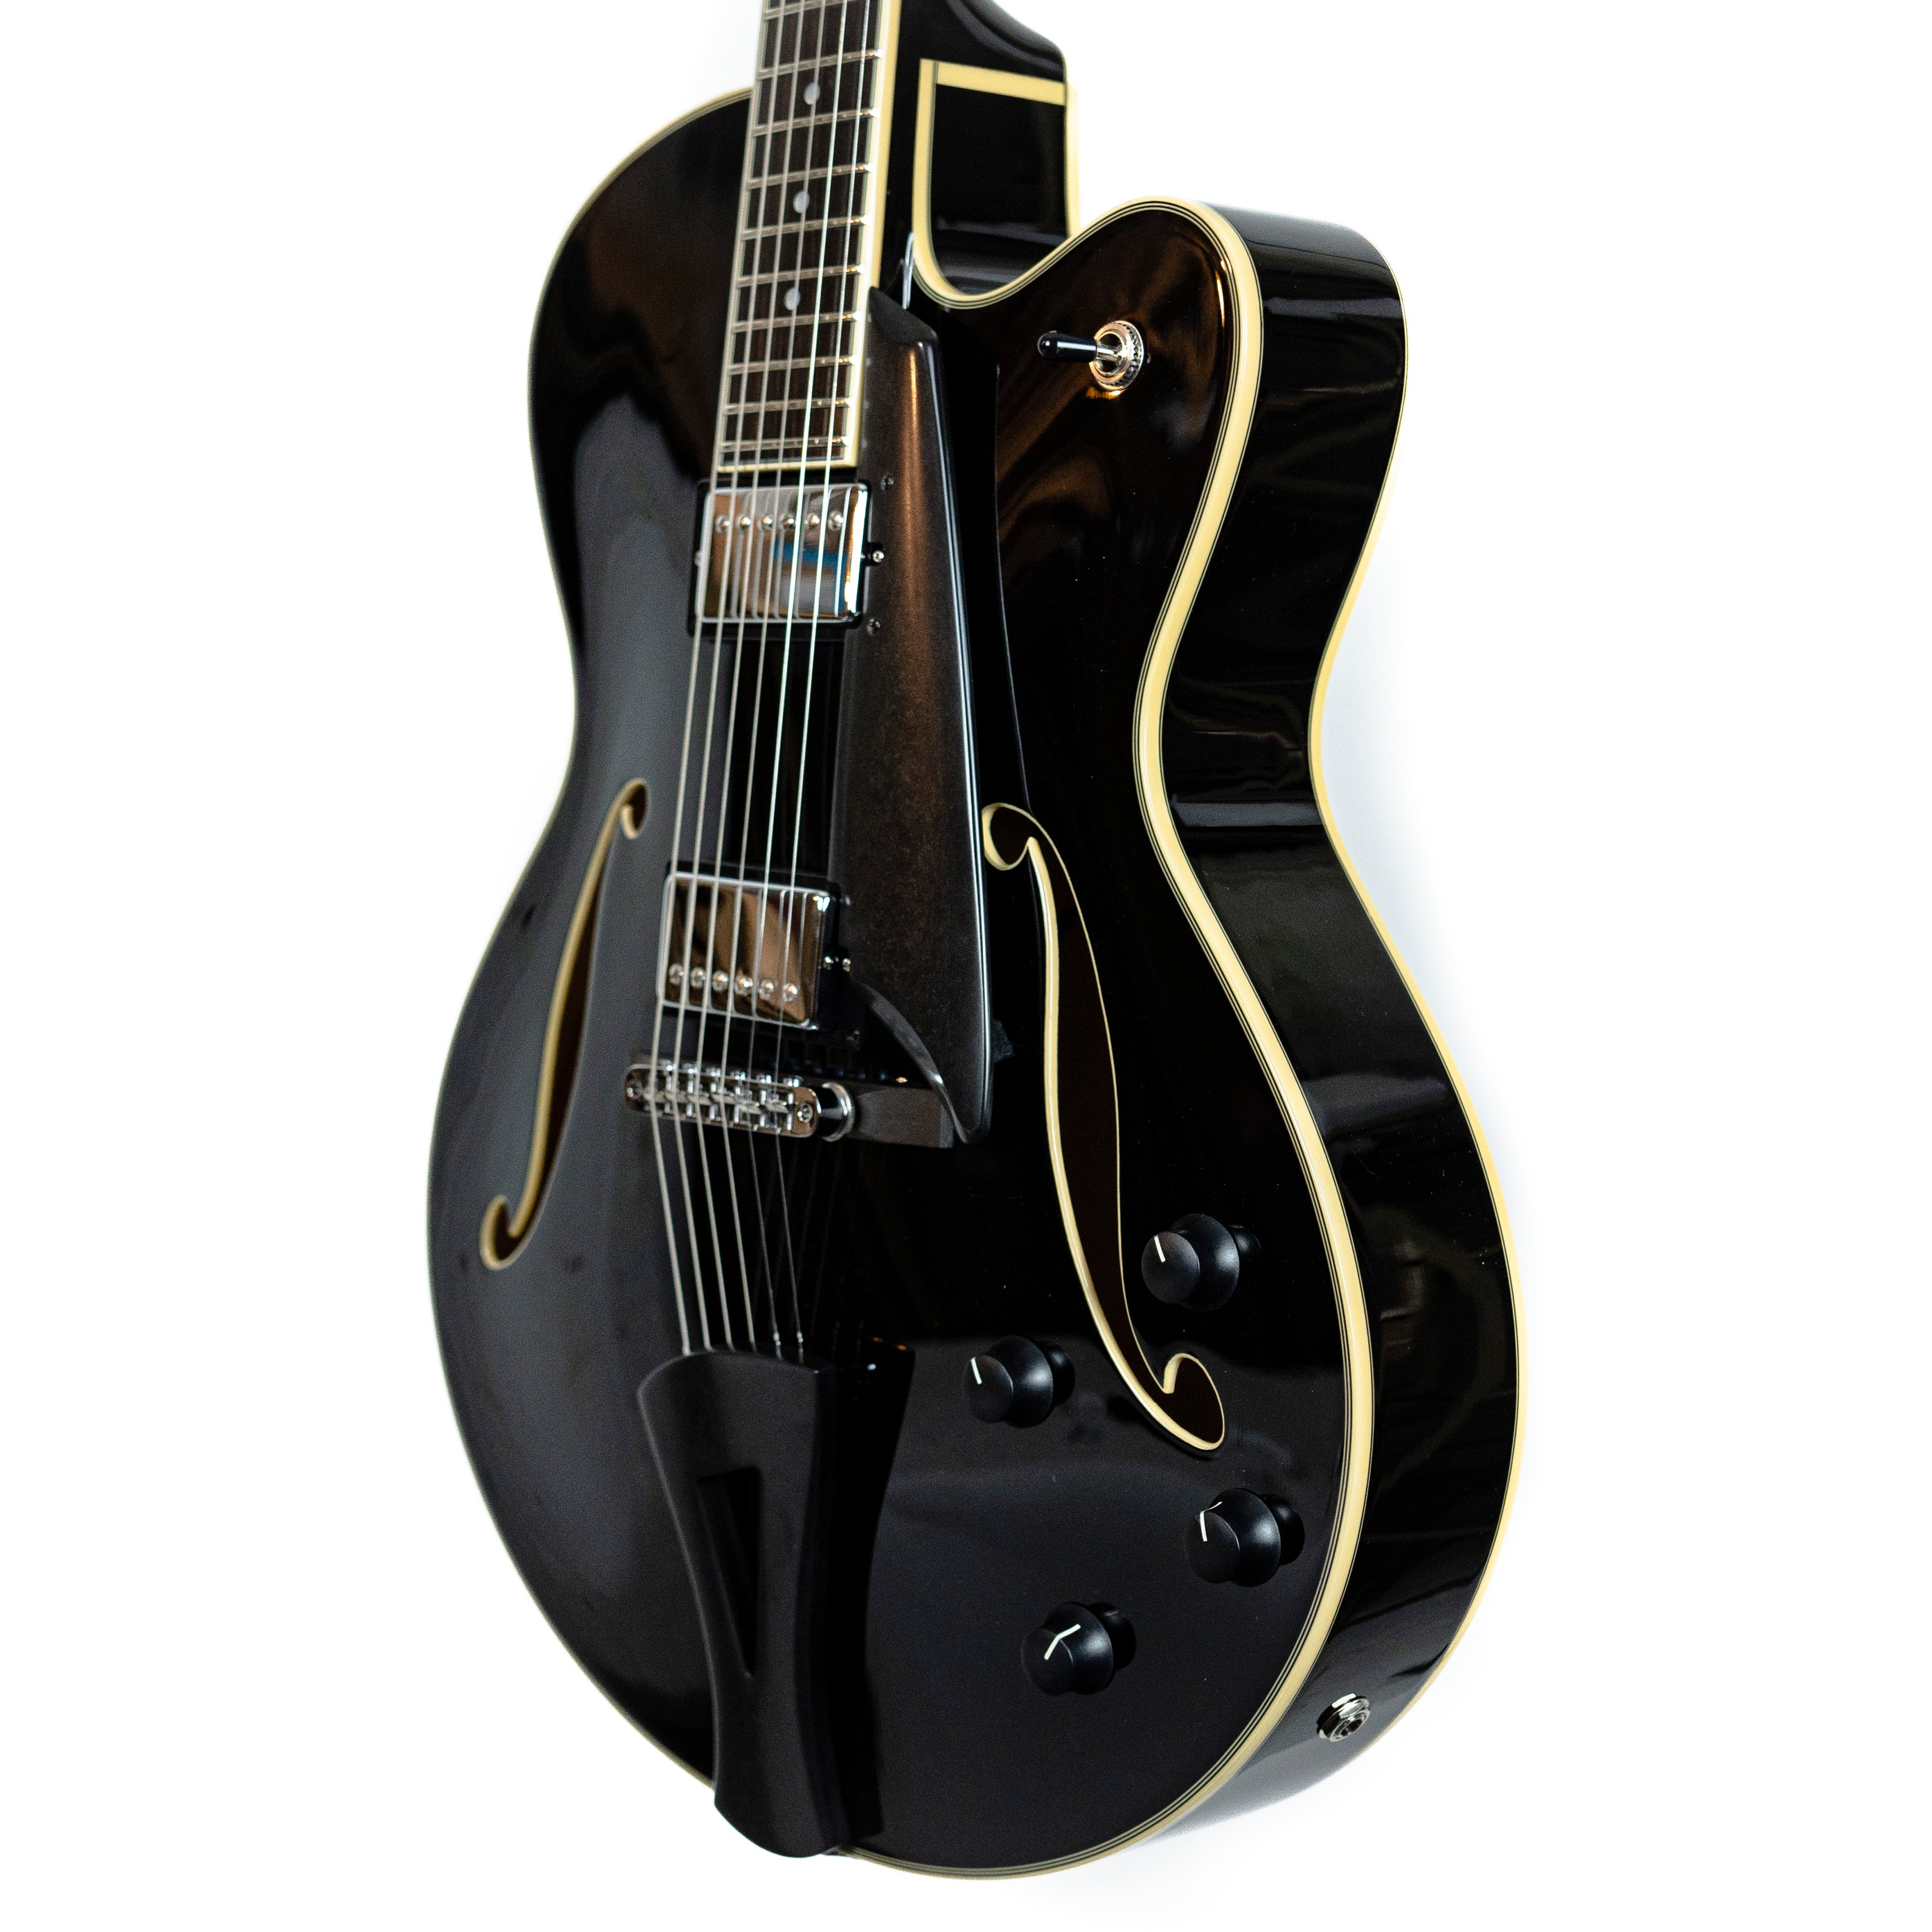 Comins GCS-16-2 Archtop in Black